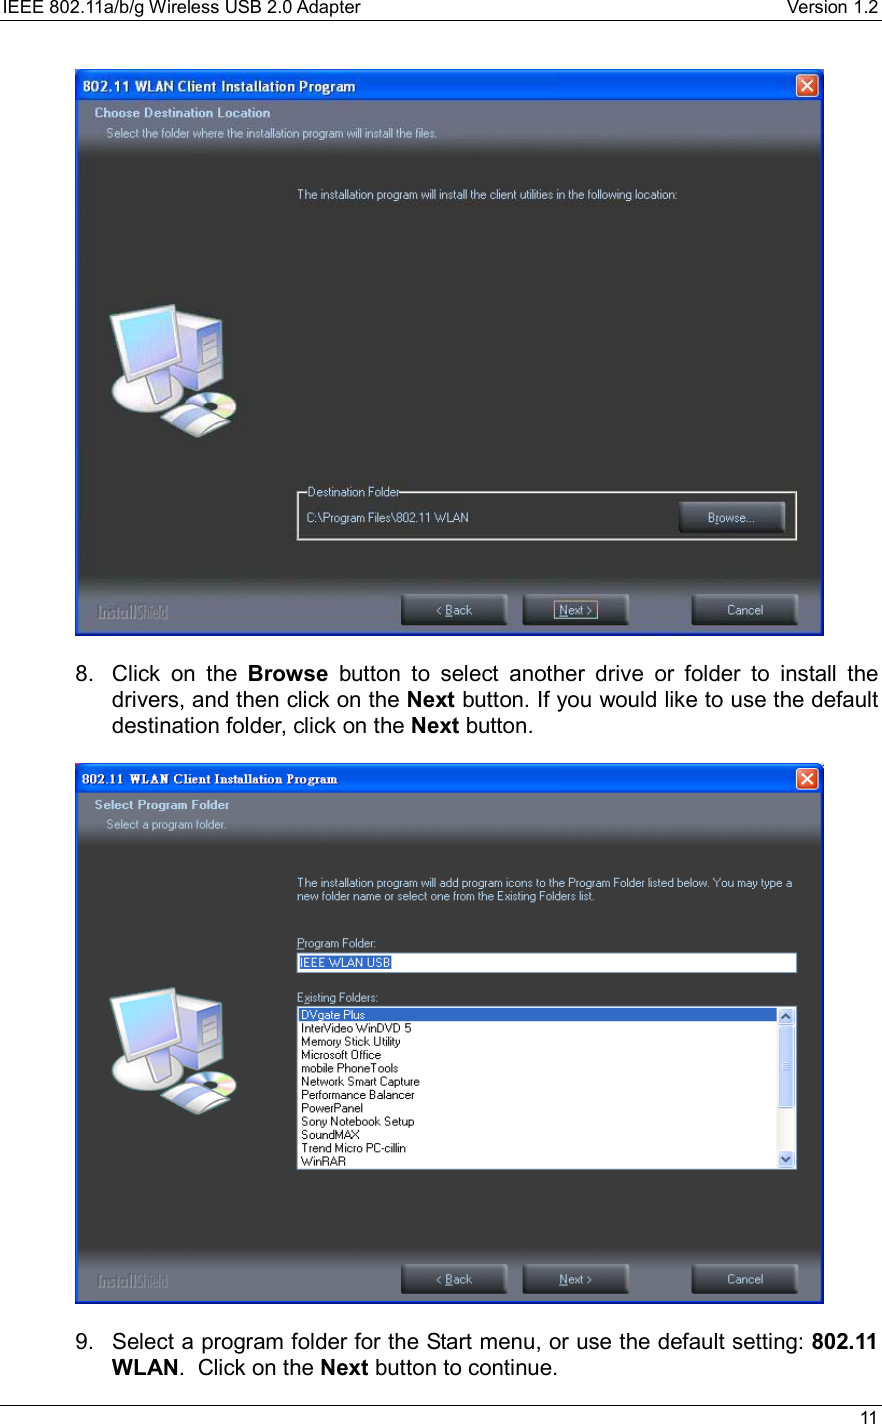 IEEE 802.11a/b/g Wireless USB 2.0 Adapter    Version 1.2   11    8.  Click on the Browse button to select another drive or folder to install the drivers, and then click on the Next button. If you would like to use the default destination folder, click on the Next button.      9.  Select a program folder for the Start menu, or use the default setting: 802.11 WLAN.  Click on the Next button to continue.  